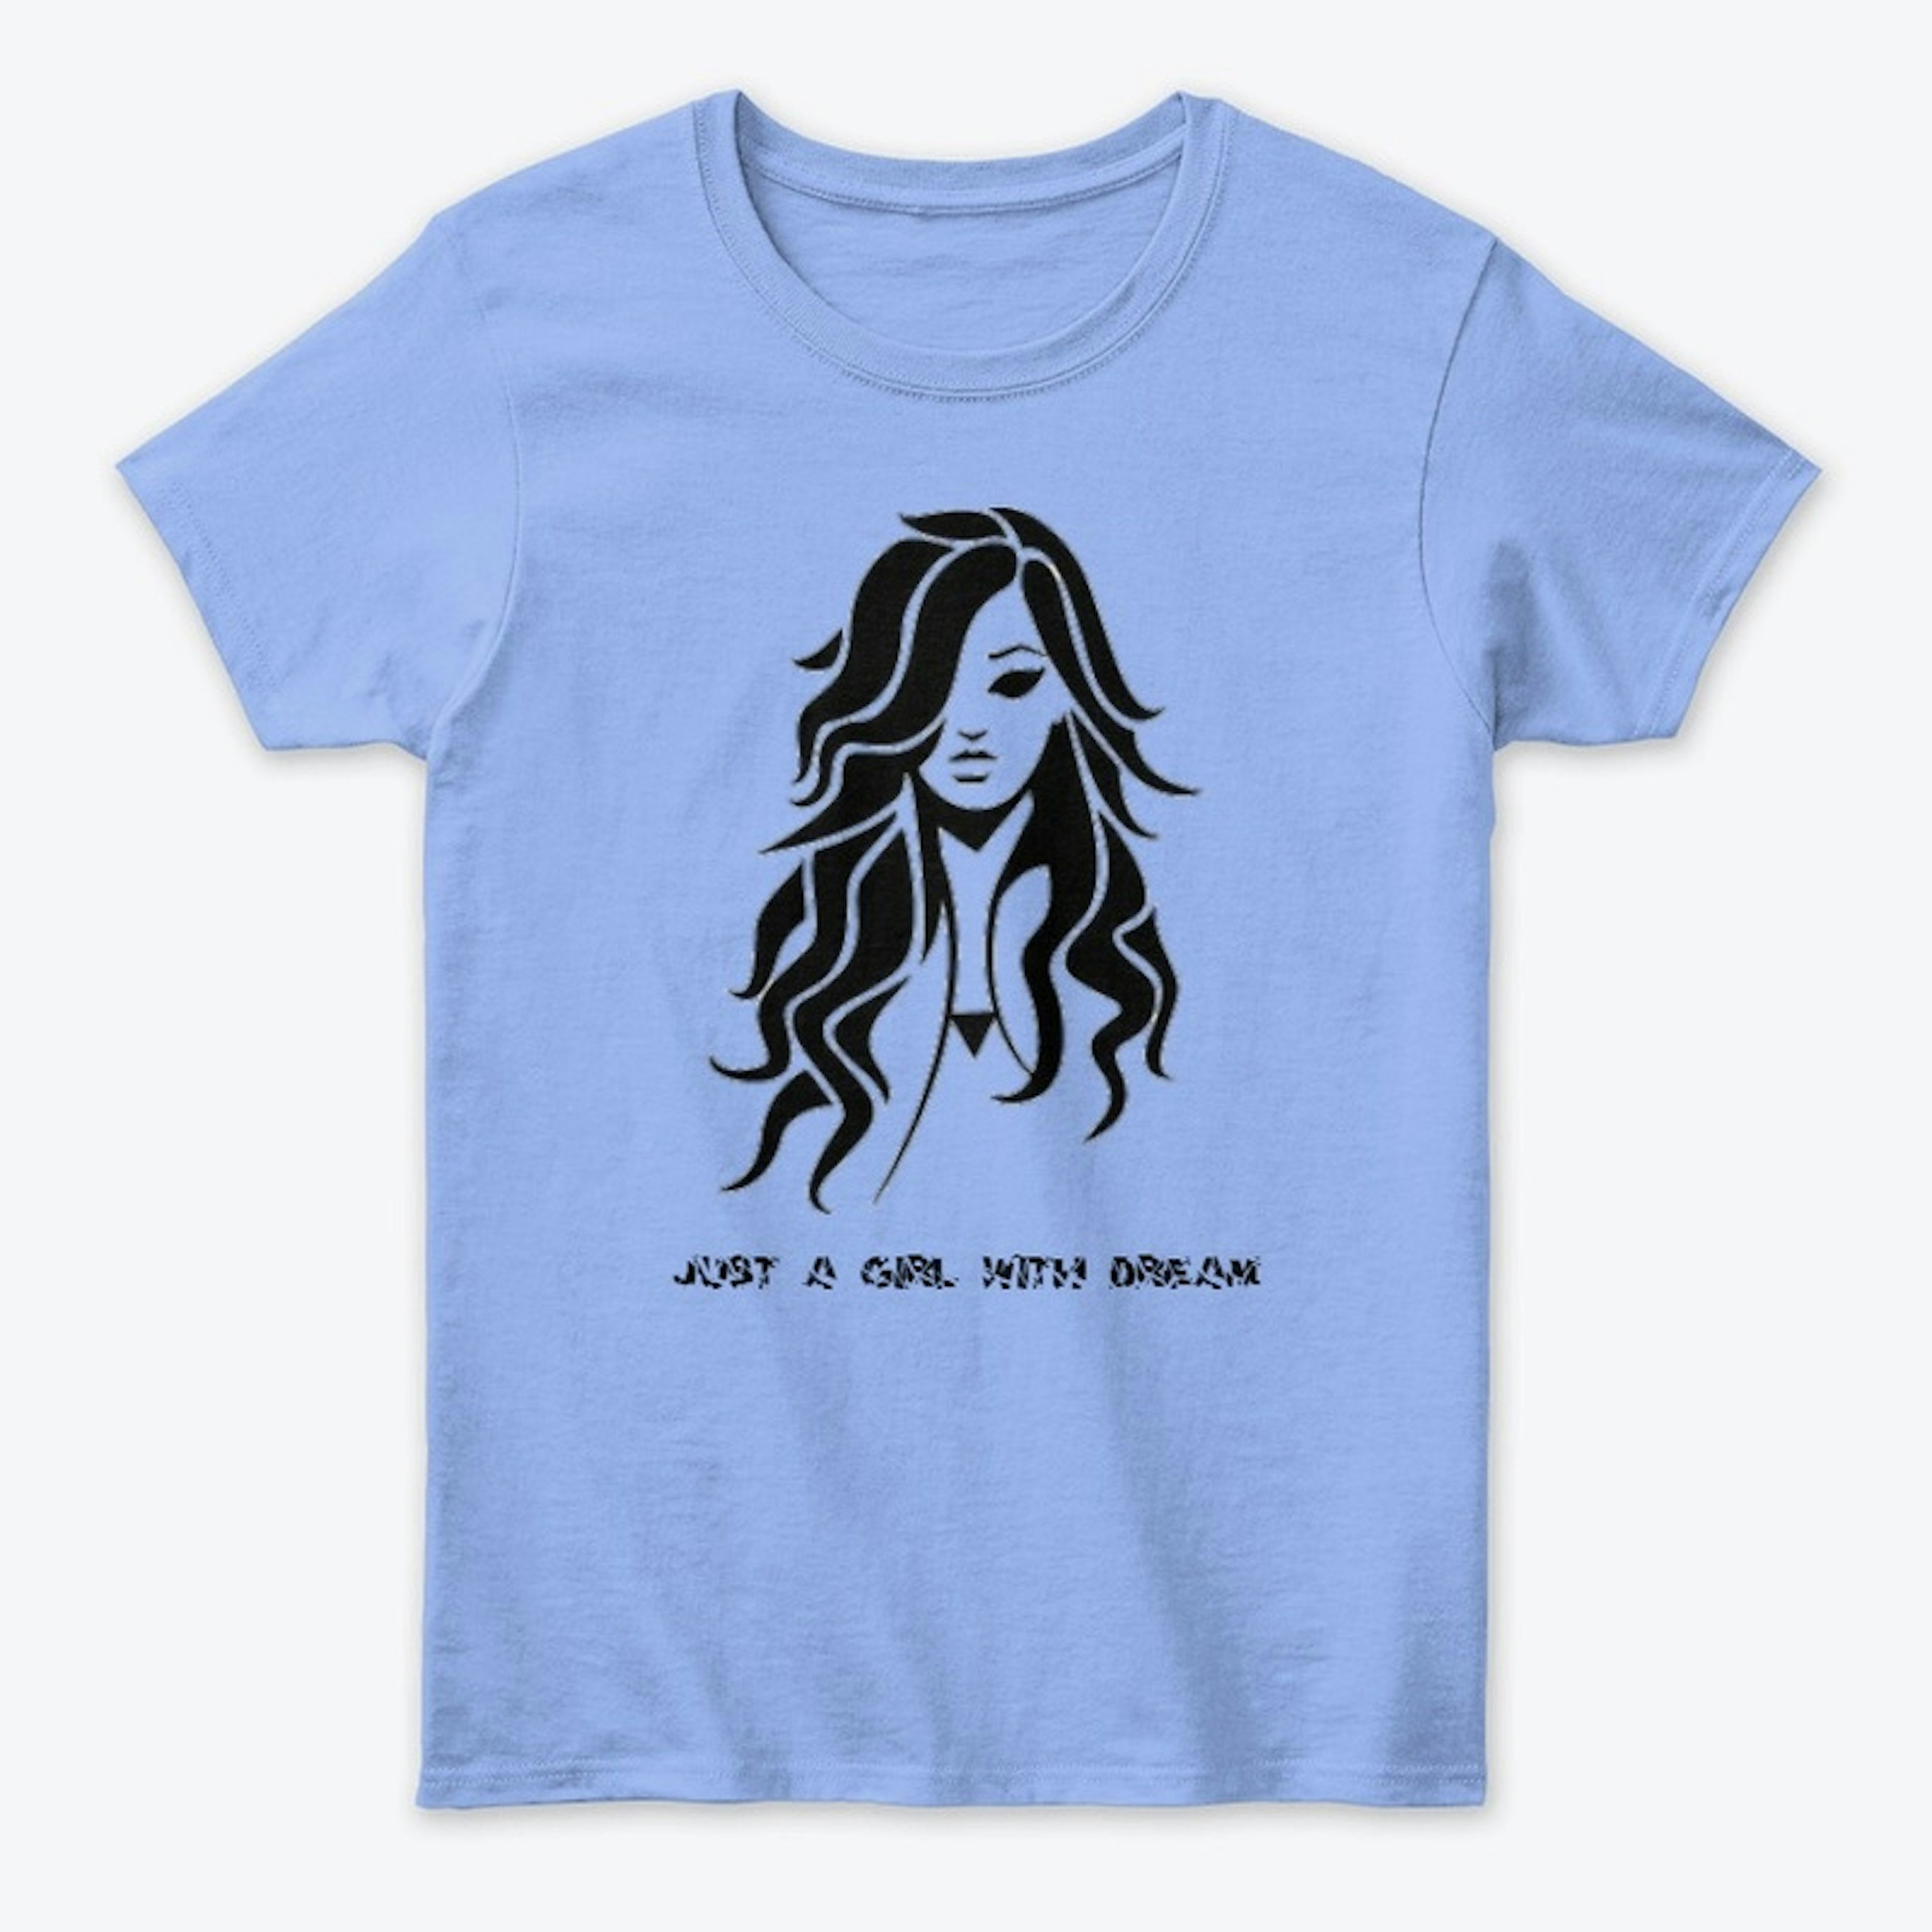 JUST A GIRL WITH A DREAM SHIRTS